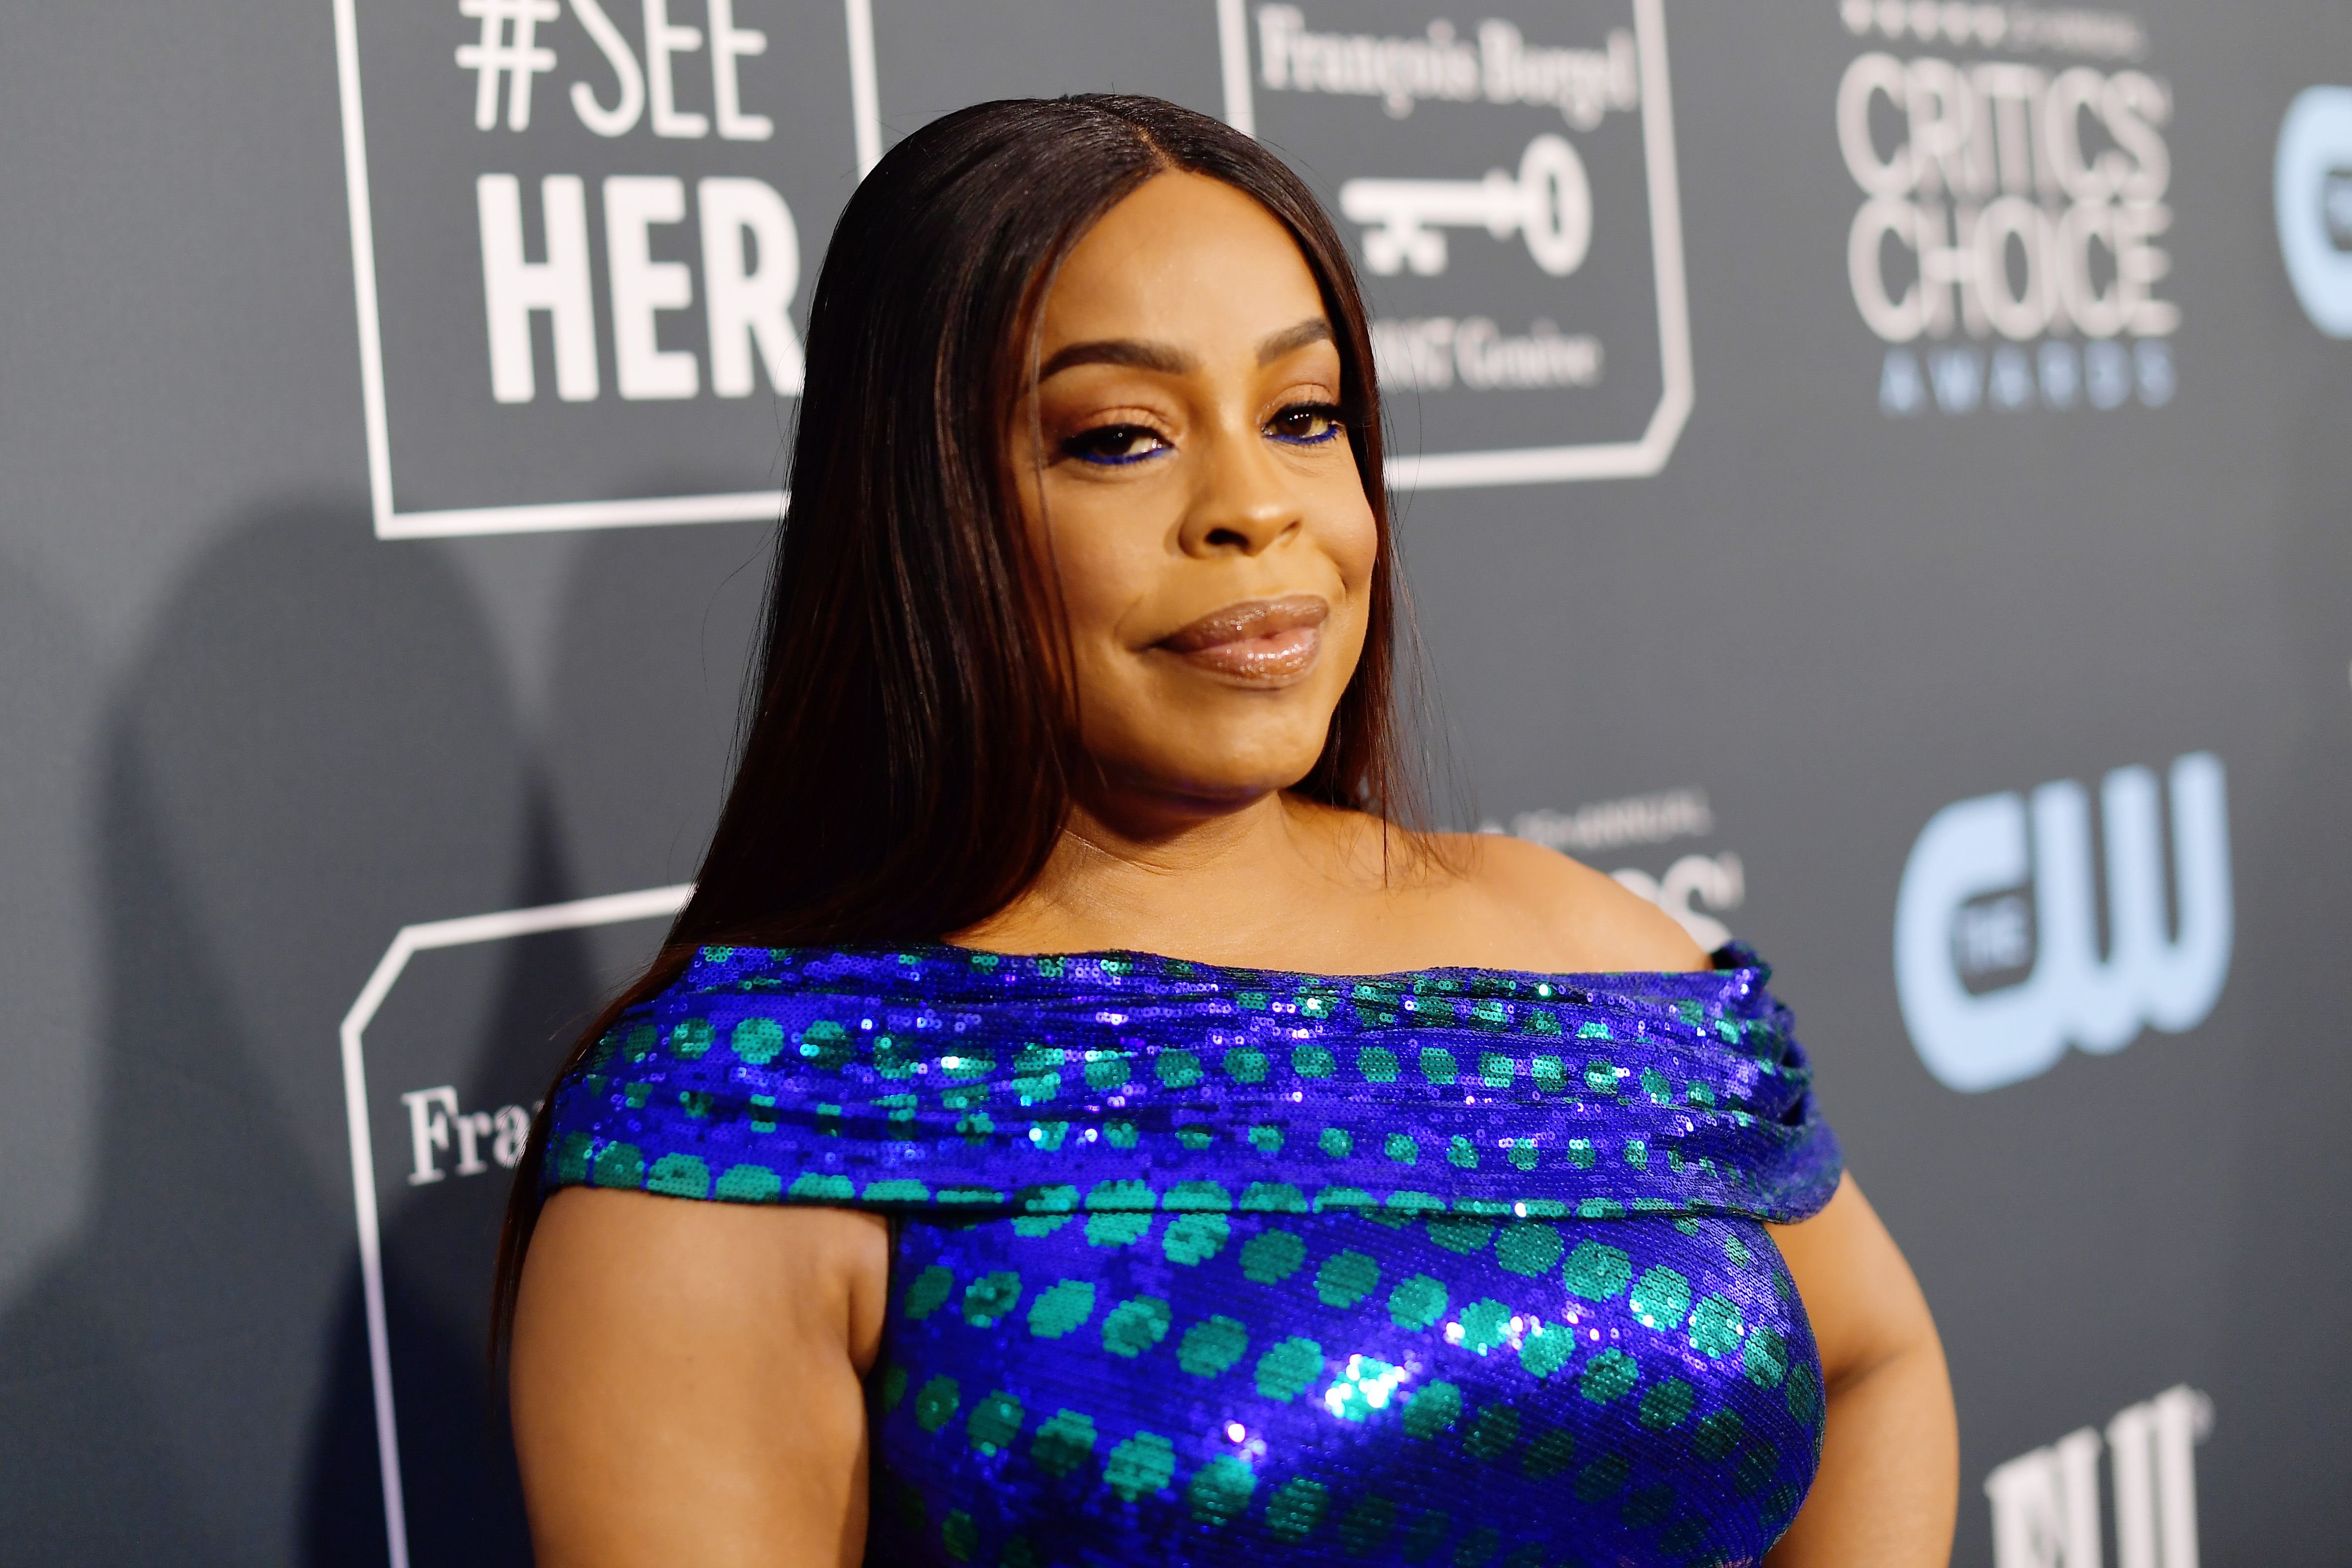 Niecy Nash at the 25th Annual Critics' Choice Awards at Barker Hangar on January 12, 2020 | Photo: Getty Images